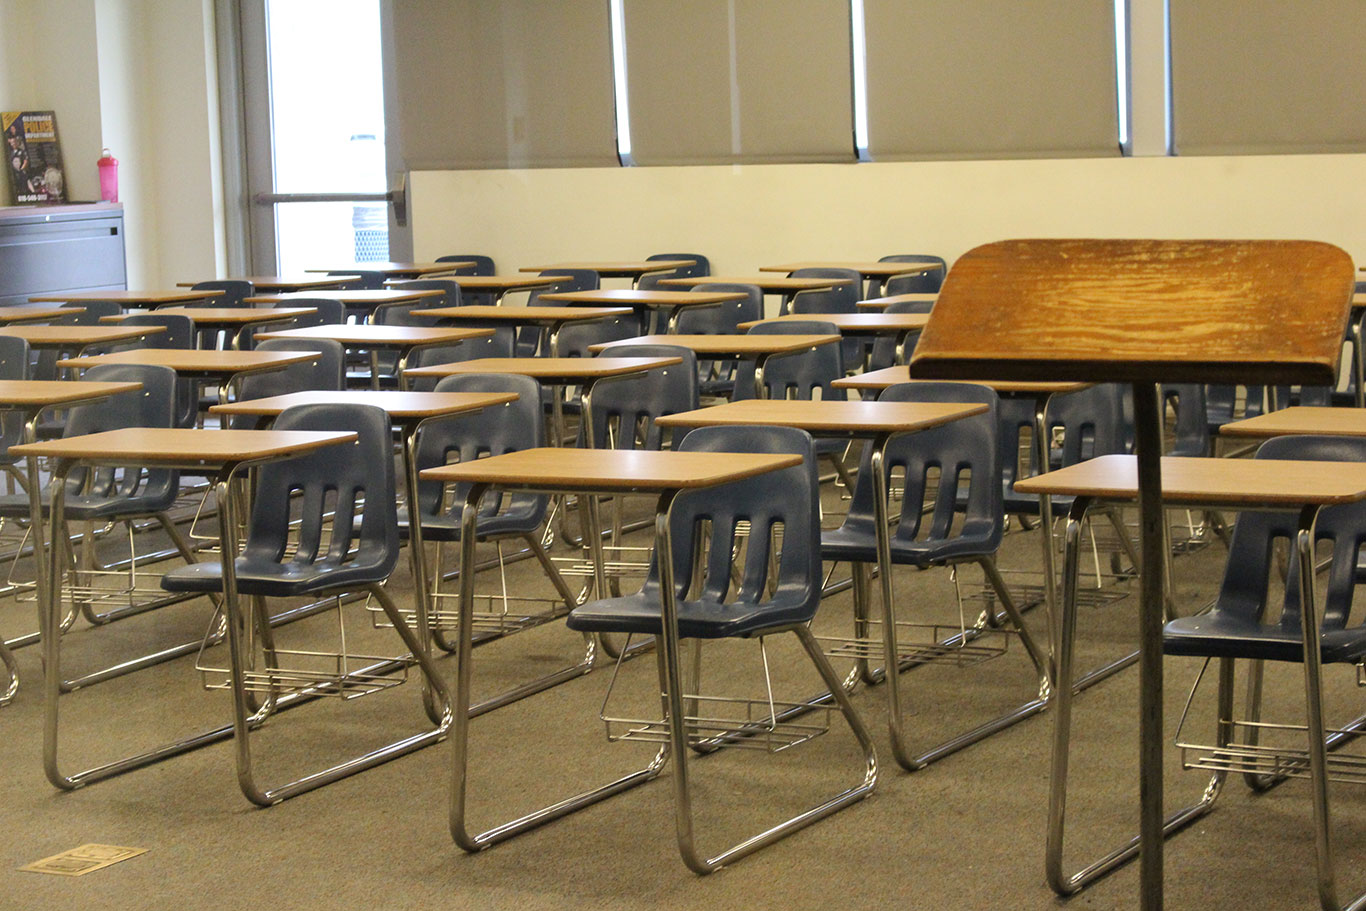 Rearranging the classroom: studying seating to improve learning